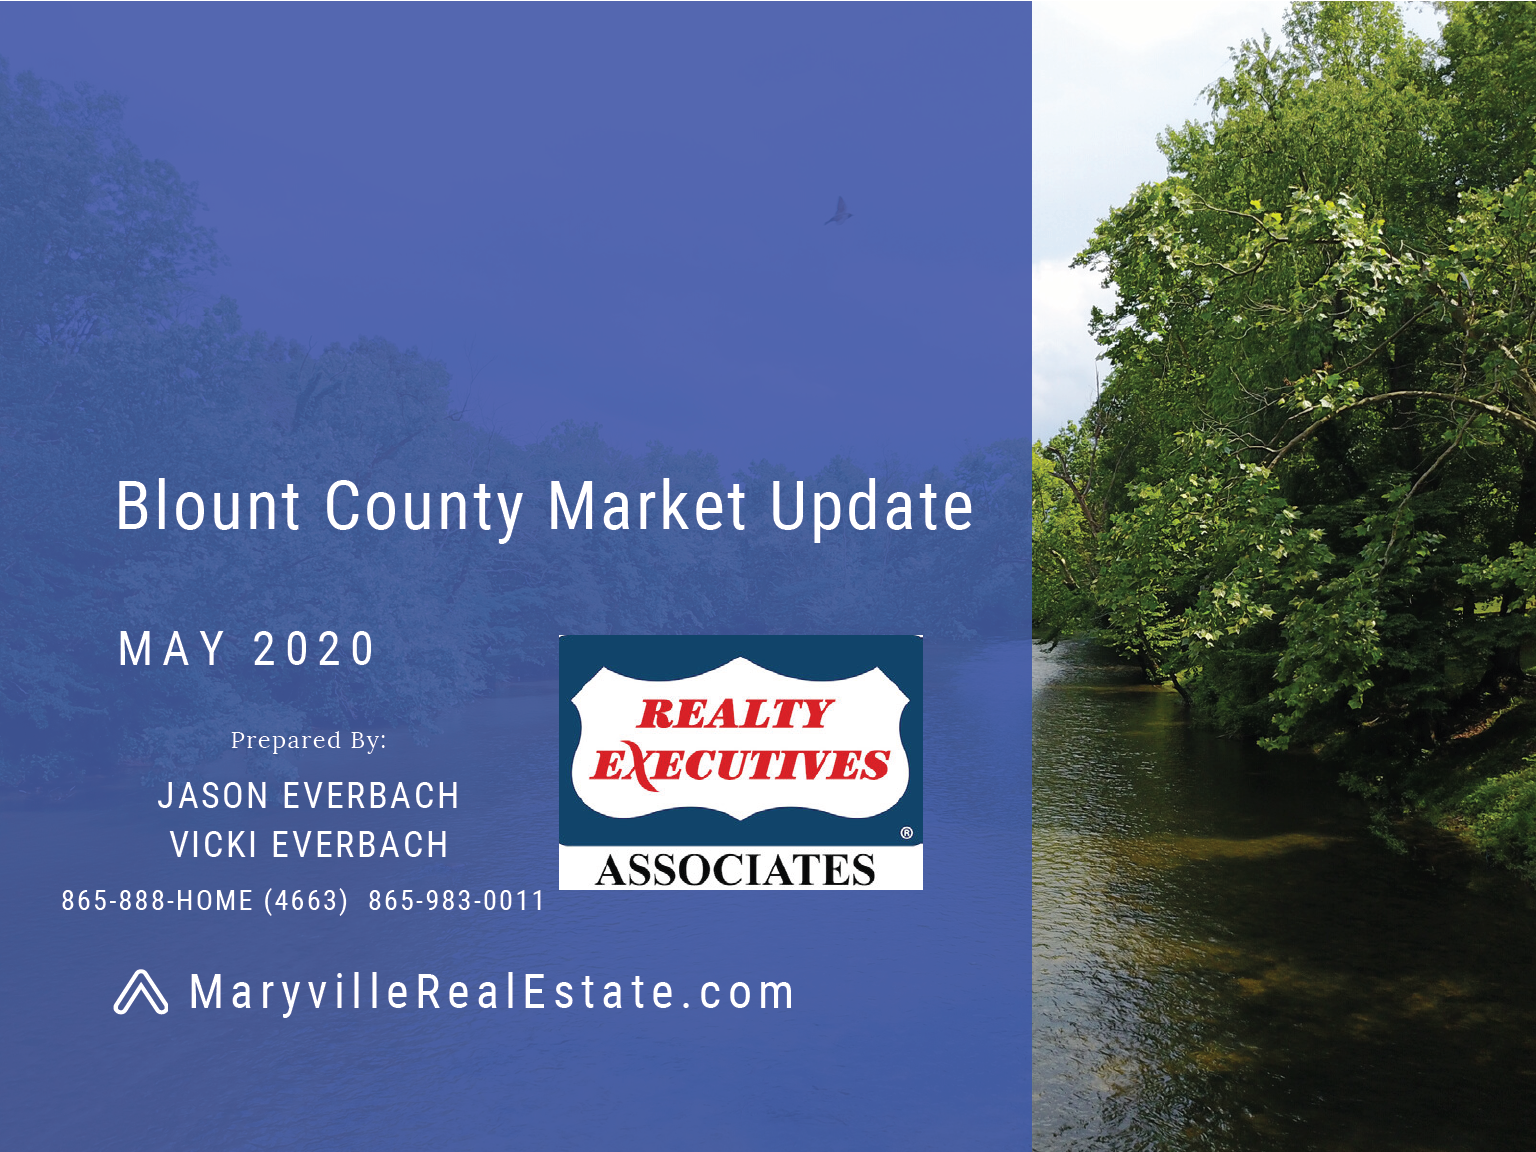 May 2020 Blount County Market Update